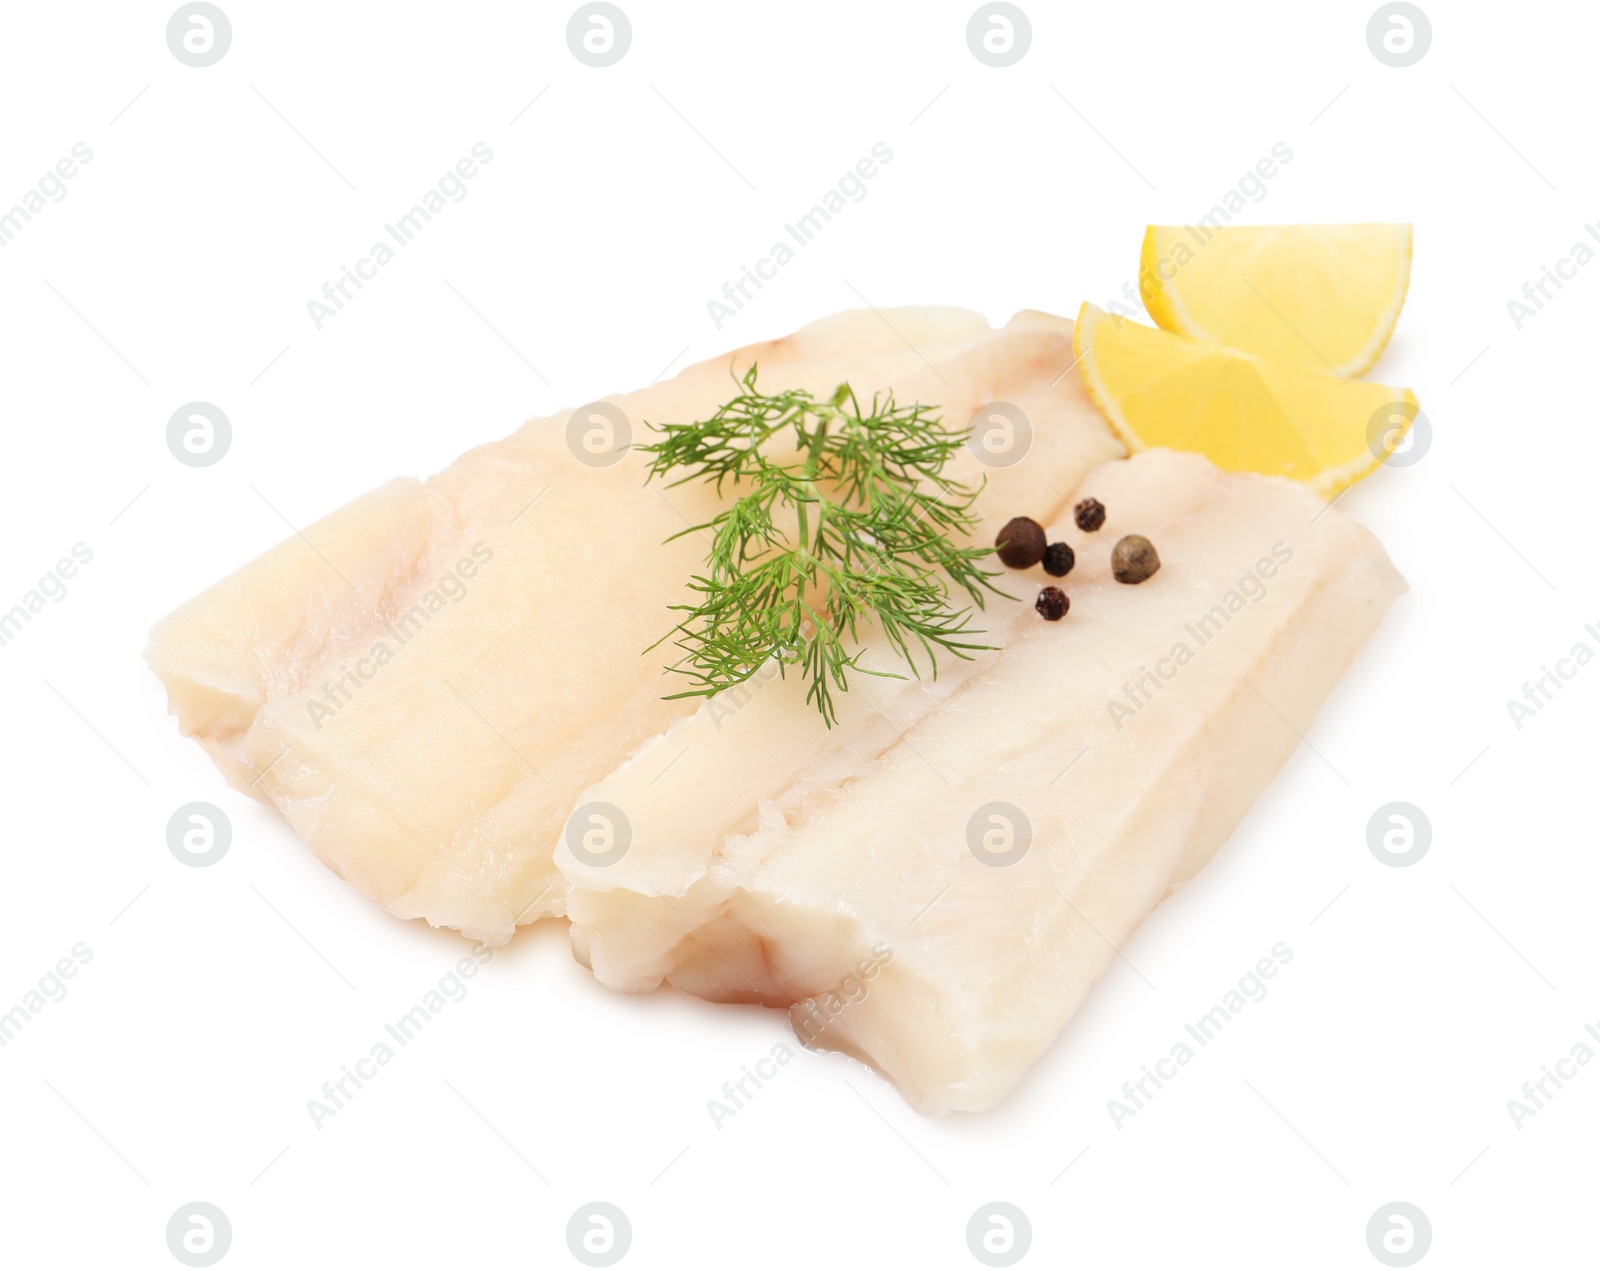 Photo of Pieces of raw cod fish, dill, peppercorns and lemon isolated on white